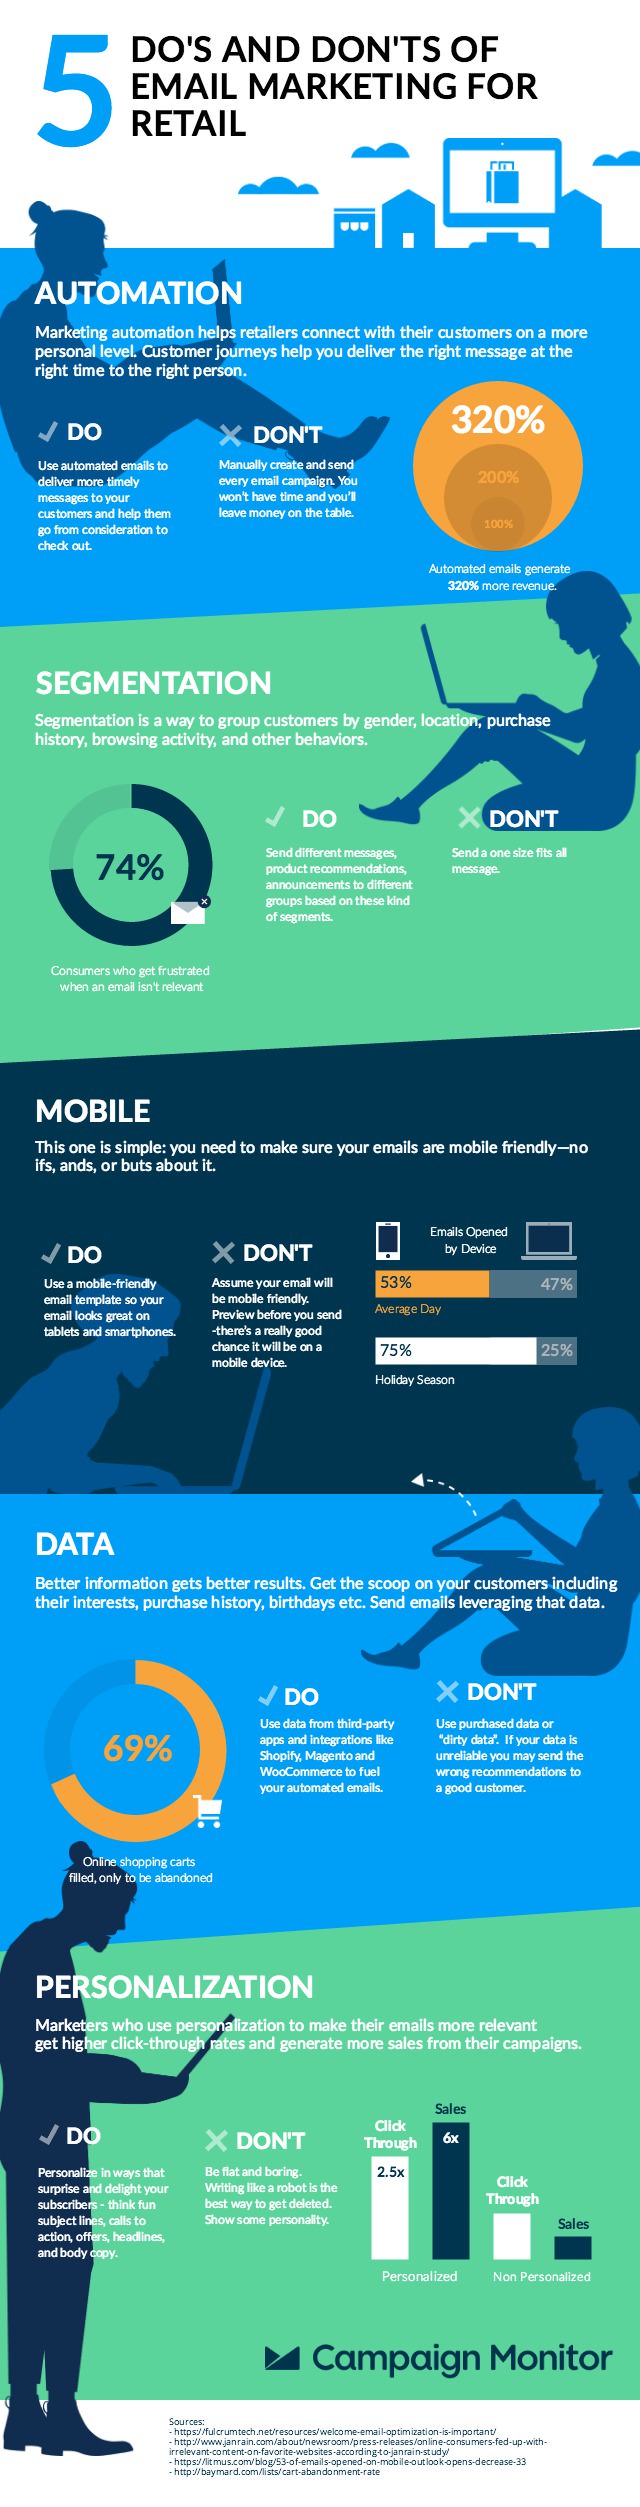 5_do_s_and_dont_s_of_email_marketing_for_retail_infographic_4.jpg